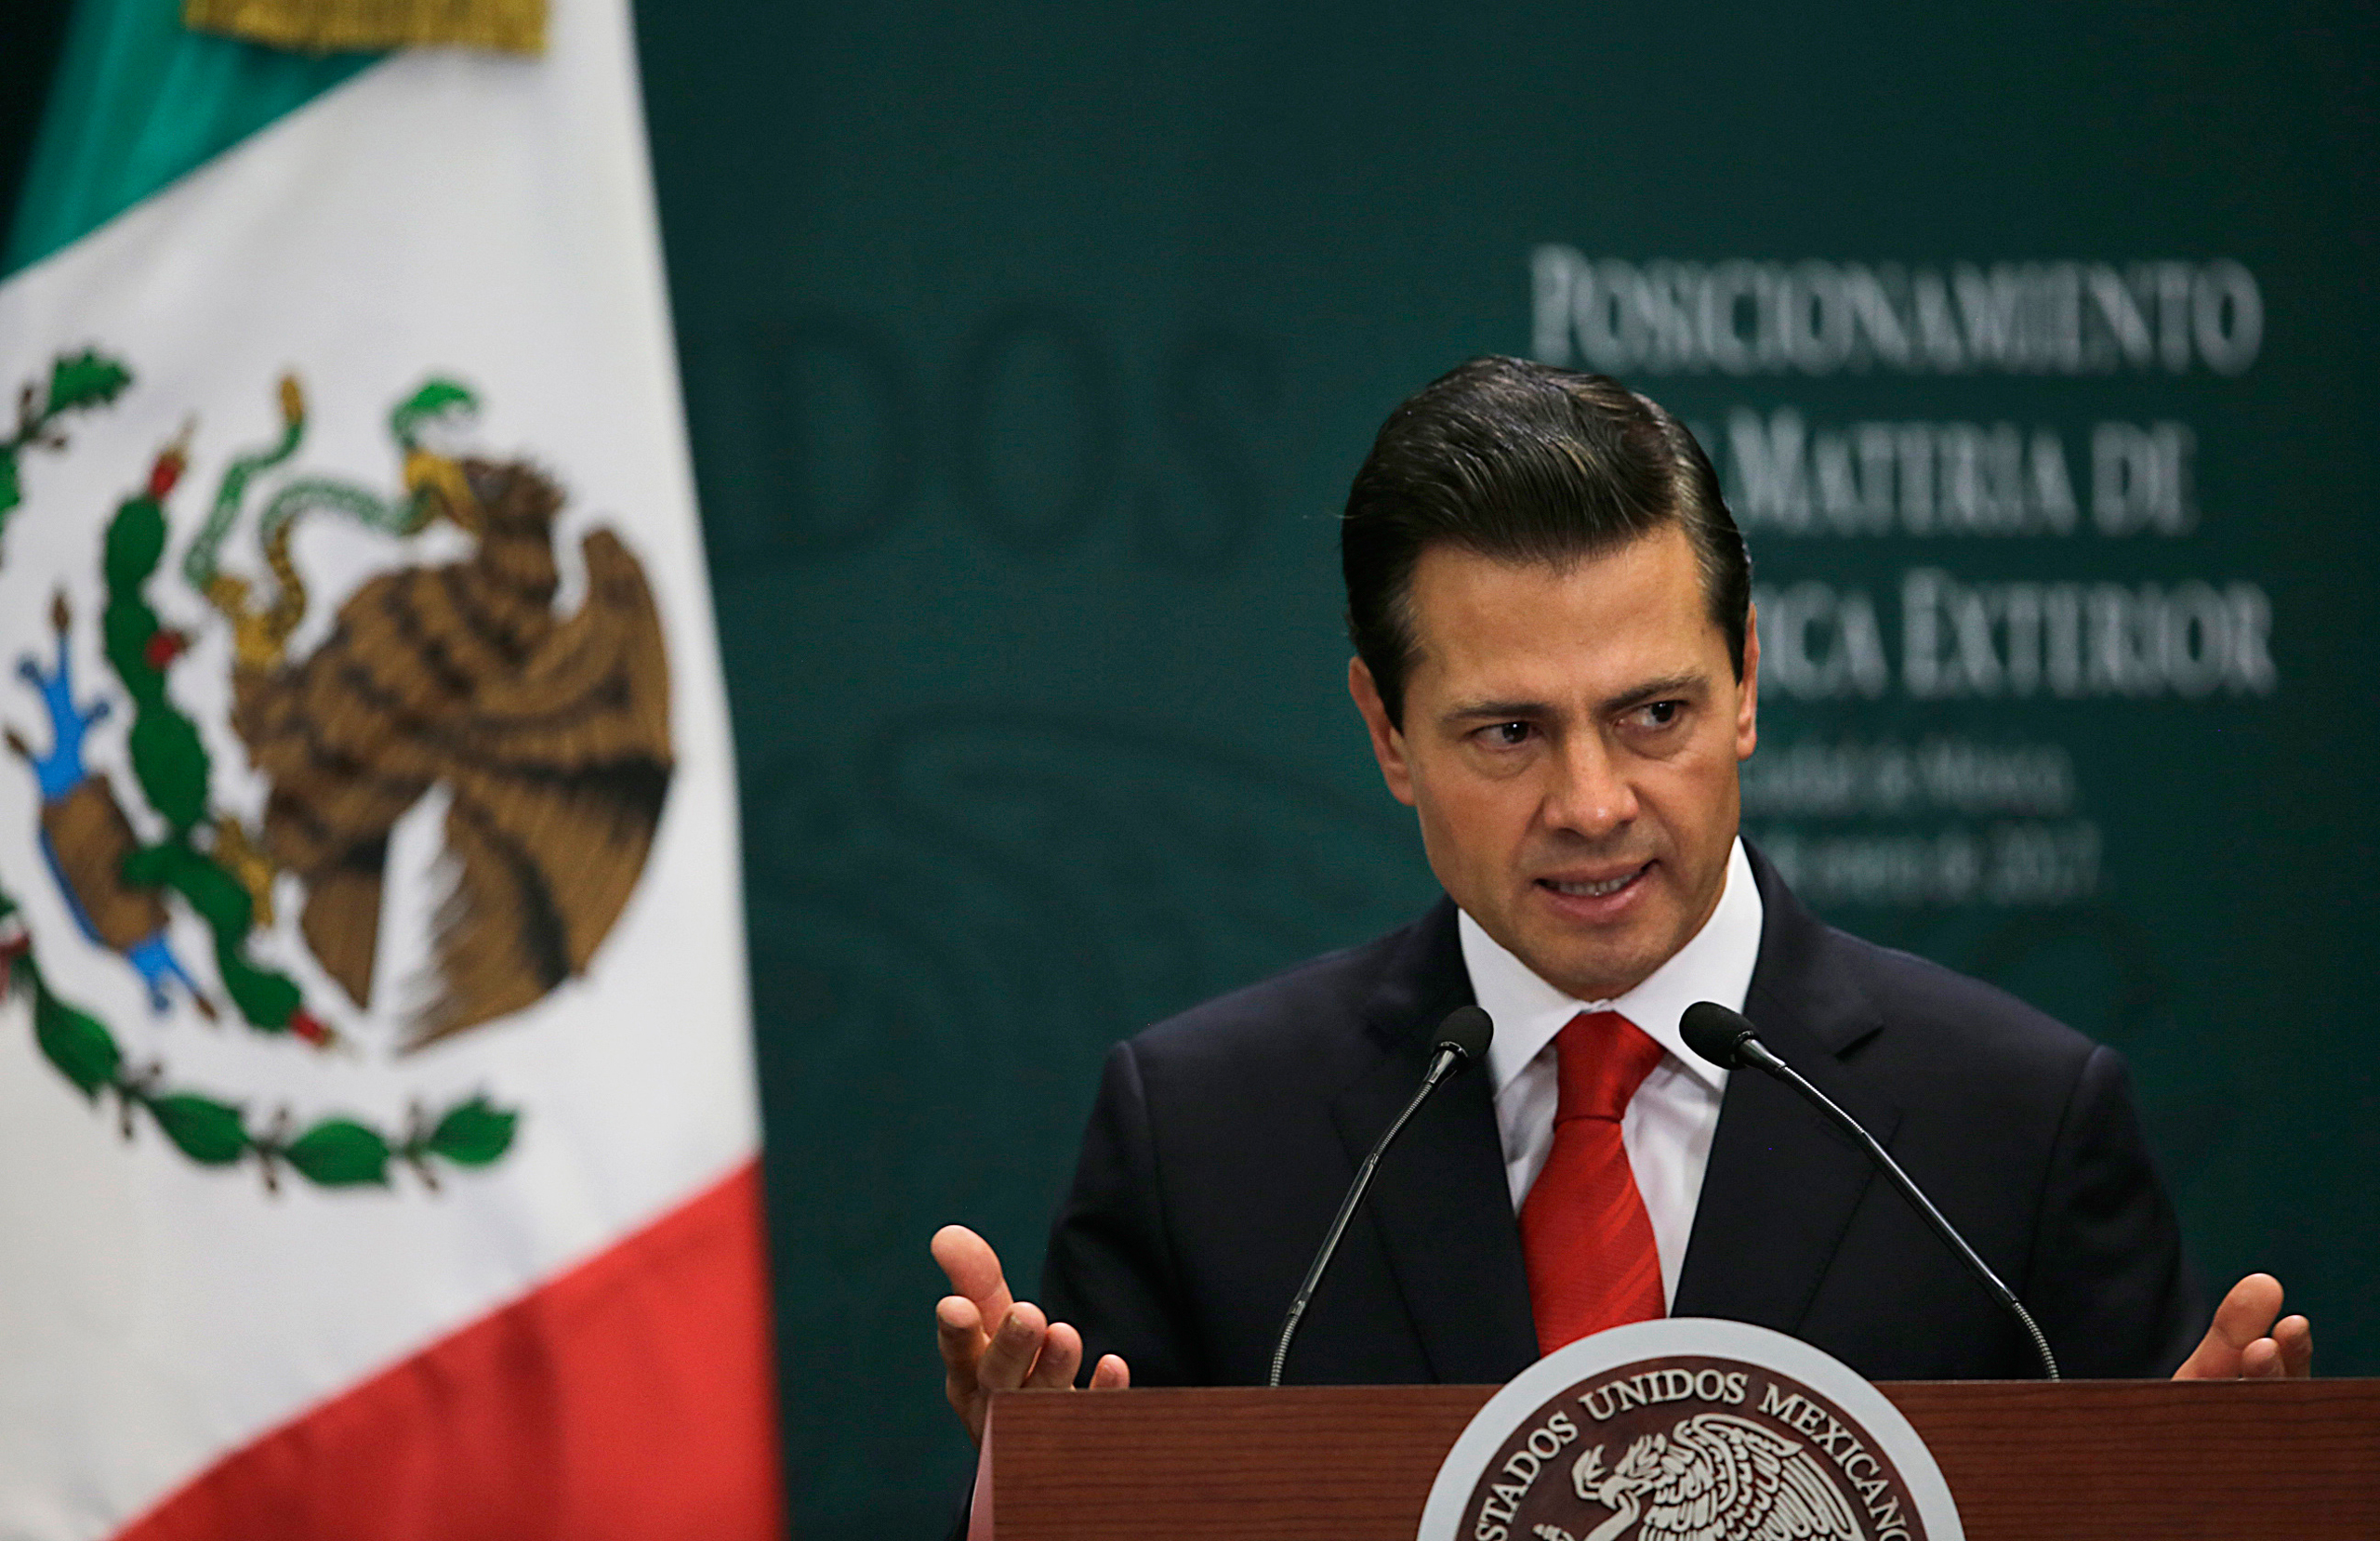 Mexico's President Enrique Pena Nieto speaks during a press conference at Los Pinos presidential residence in Mexico City on Jan. 23, 2017. (Marco Ugarte—AP)